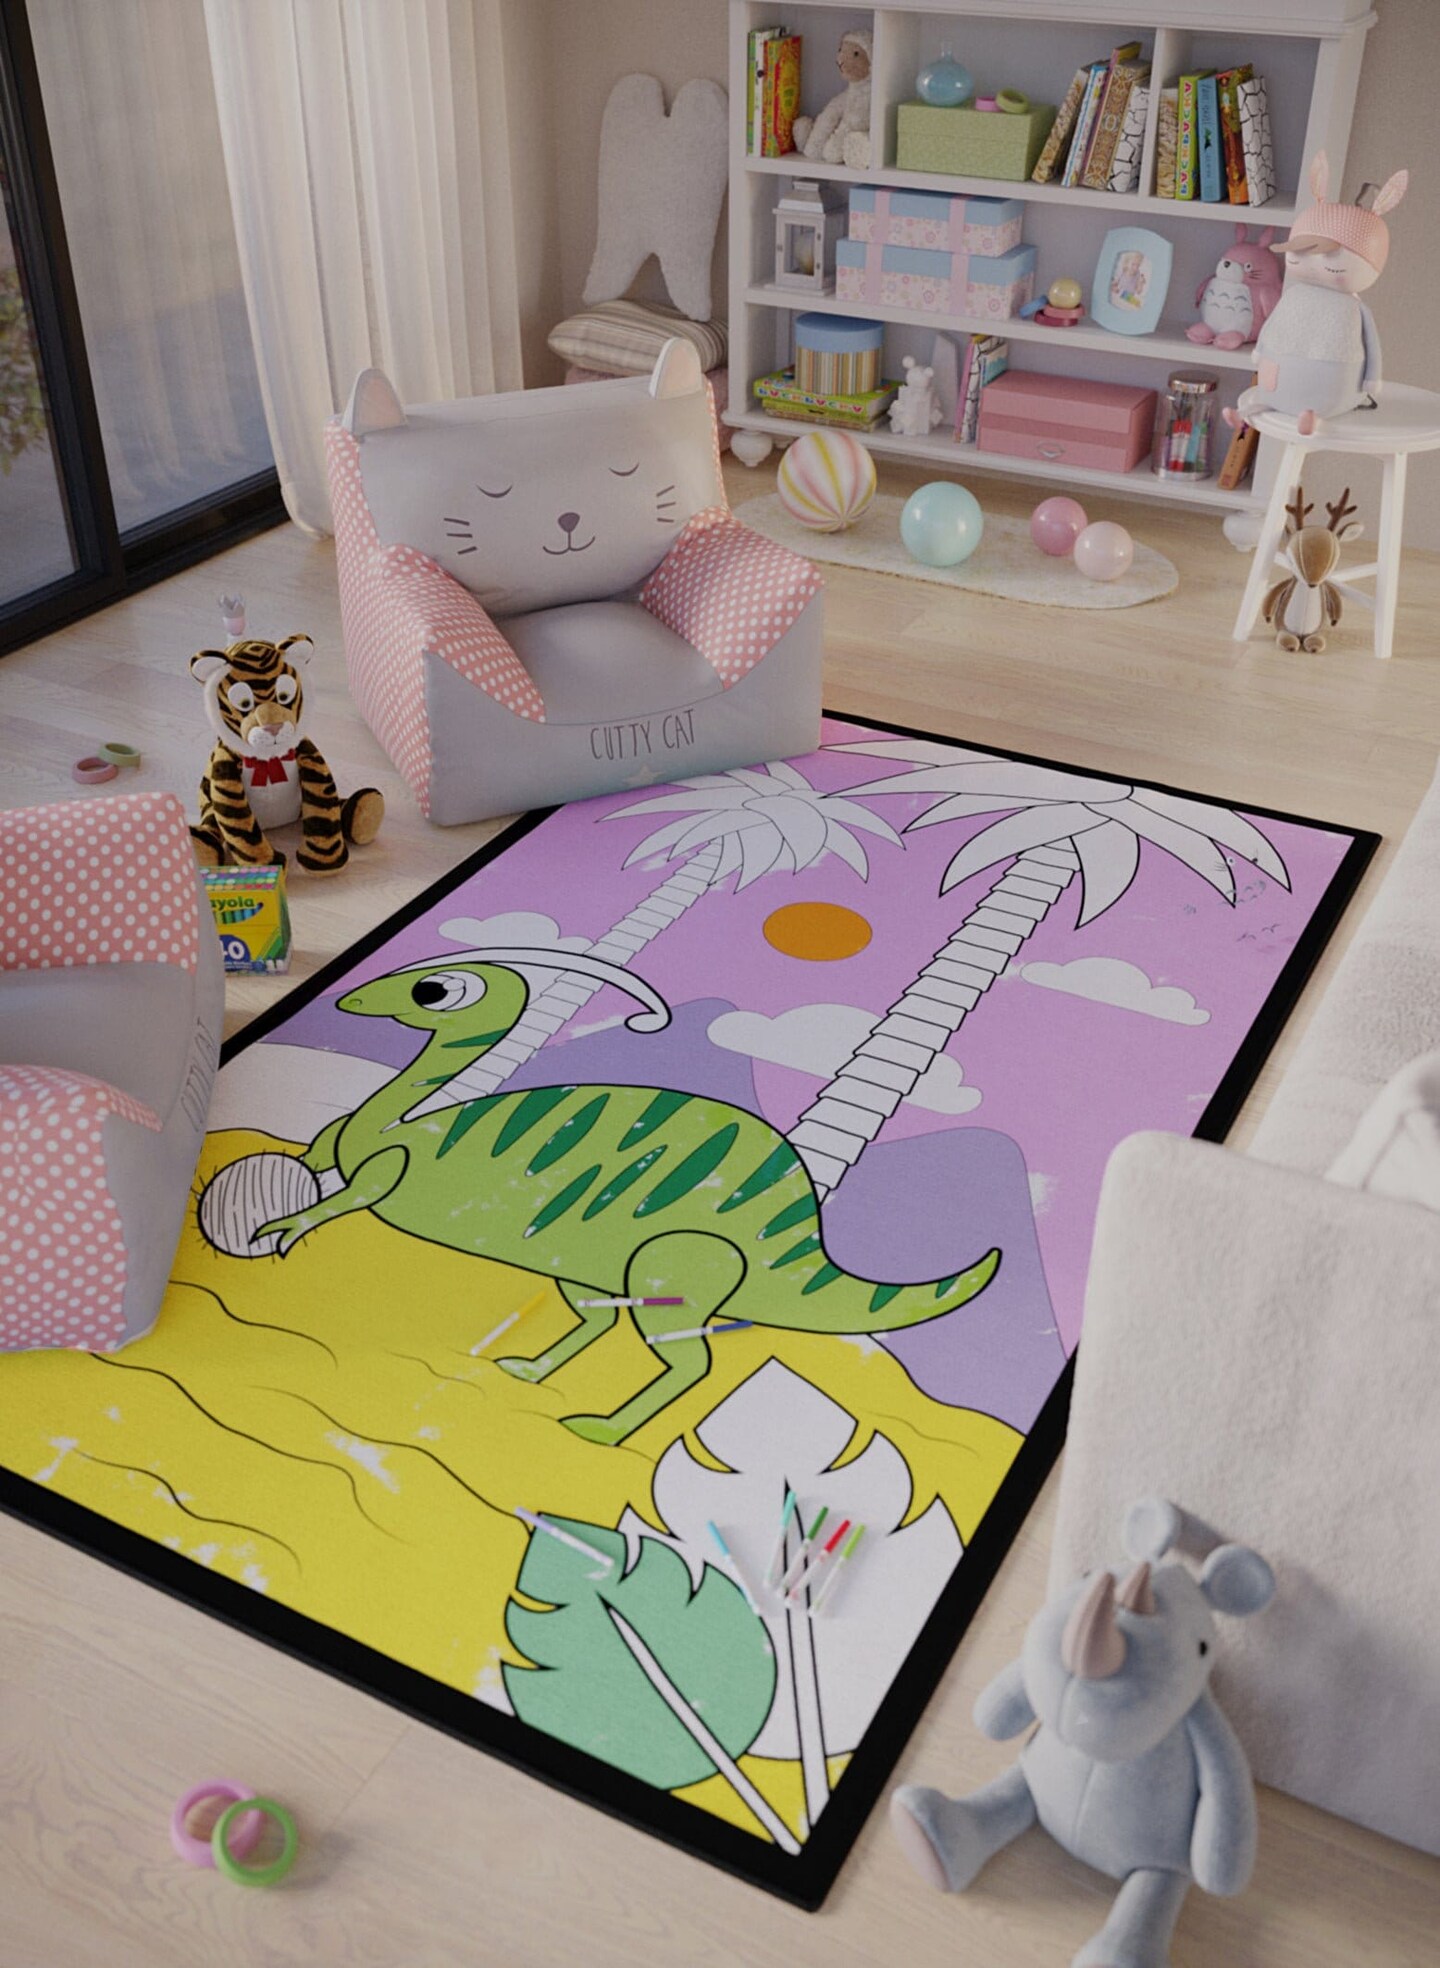 Dinosaur Coloring Rug Tablecloth Poster Washable Markers Parasaurolophus Theme Playroom Decoration Room Gift For Kids Boy Gift For Artist